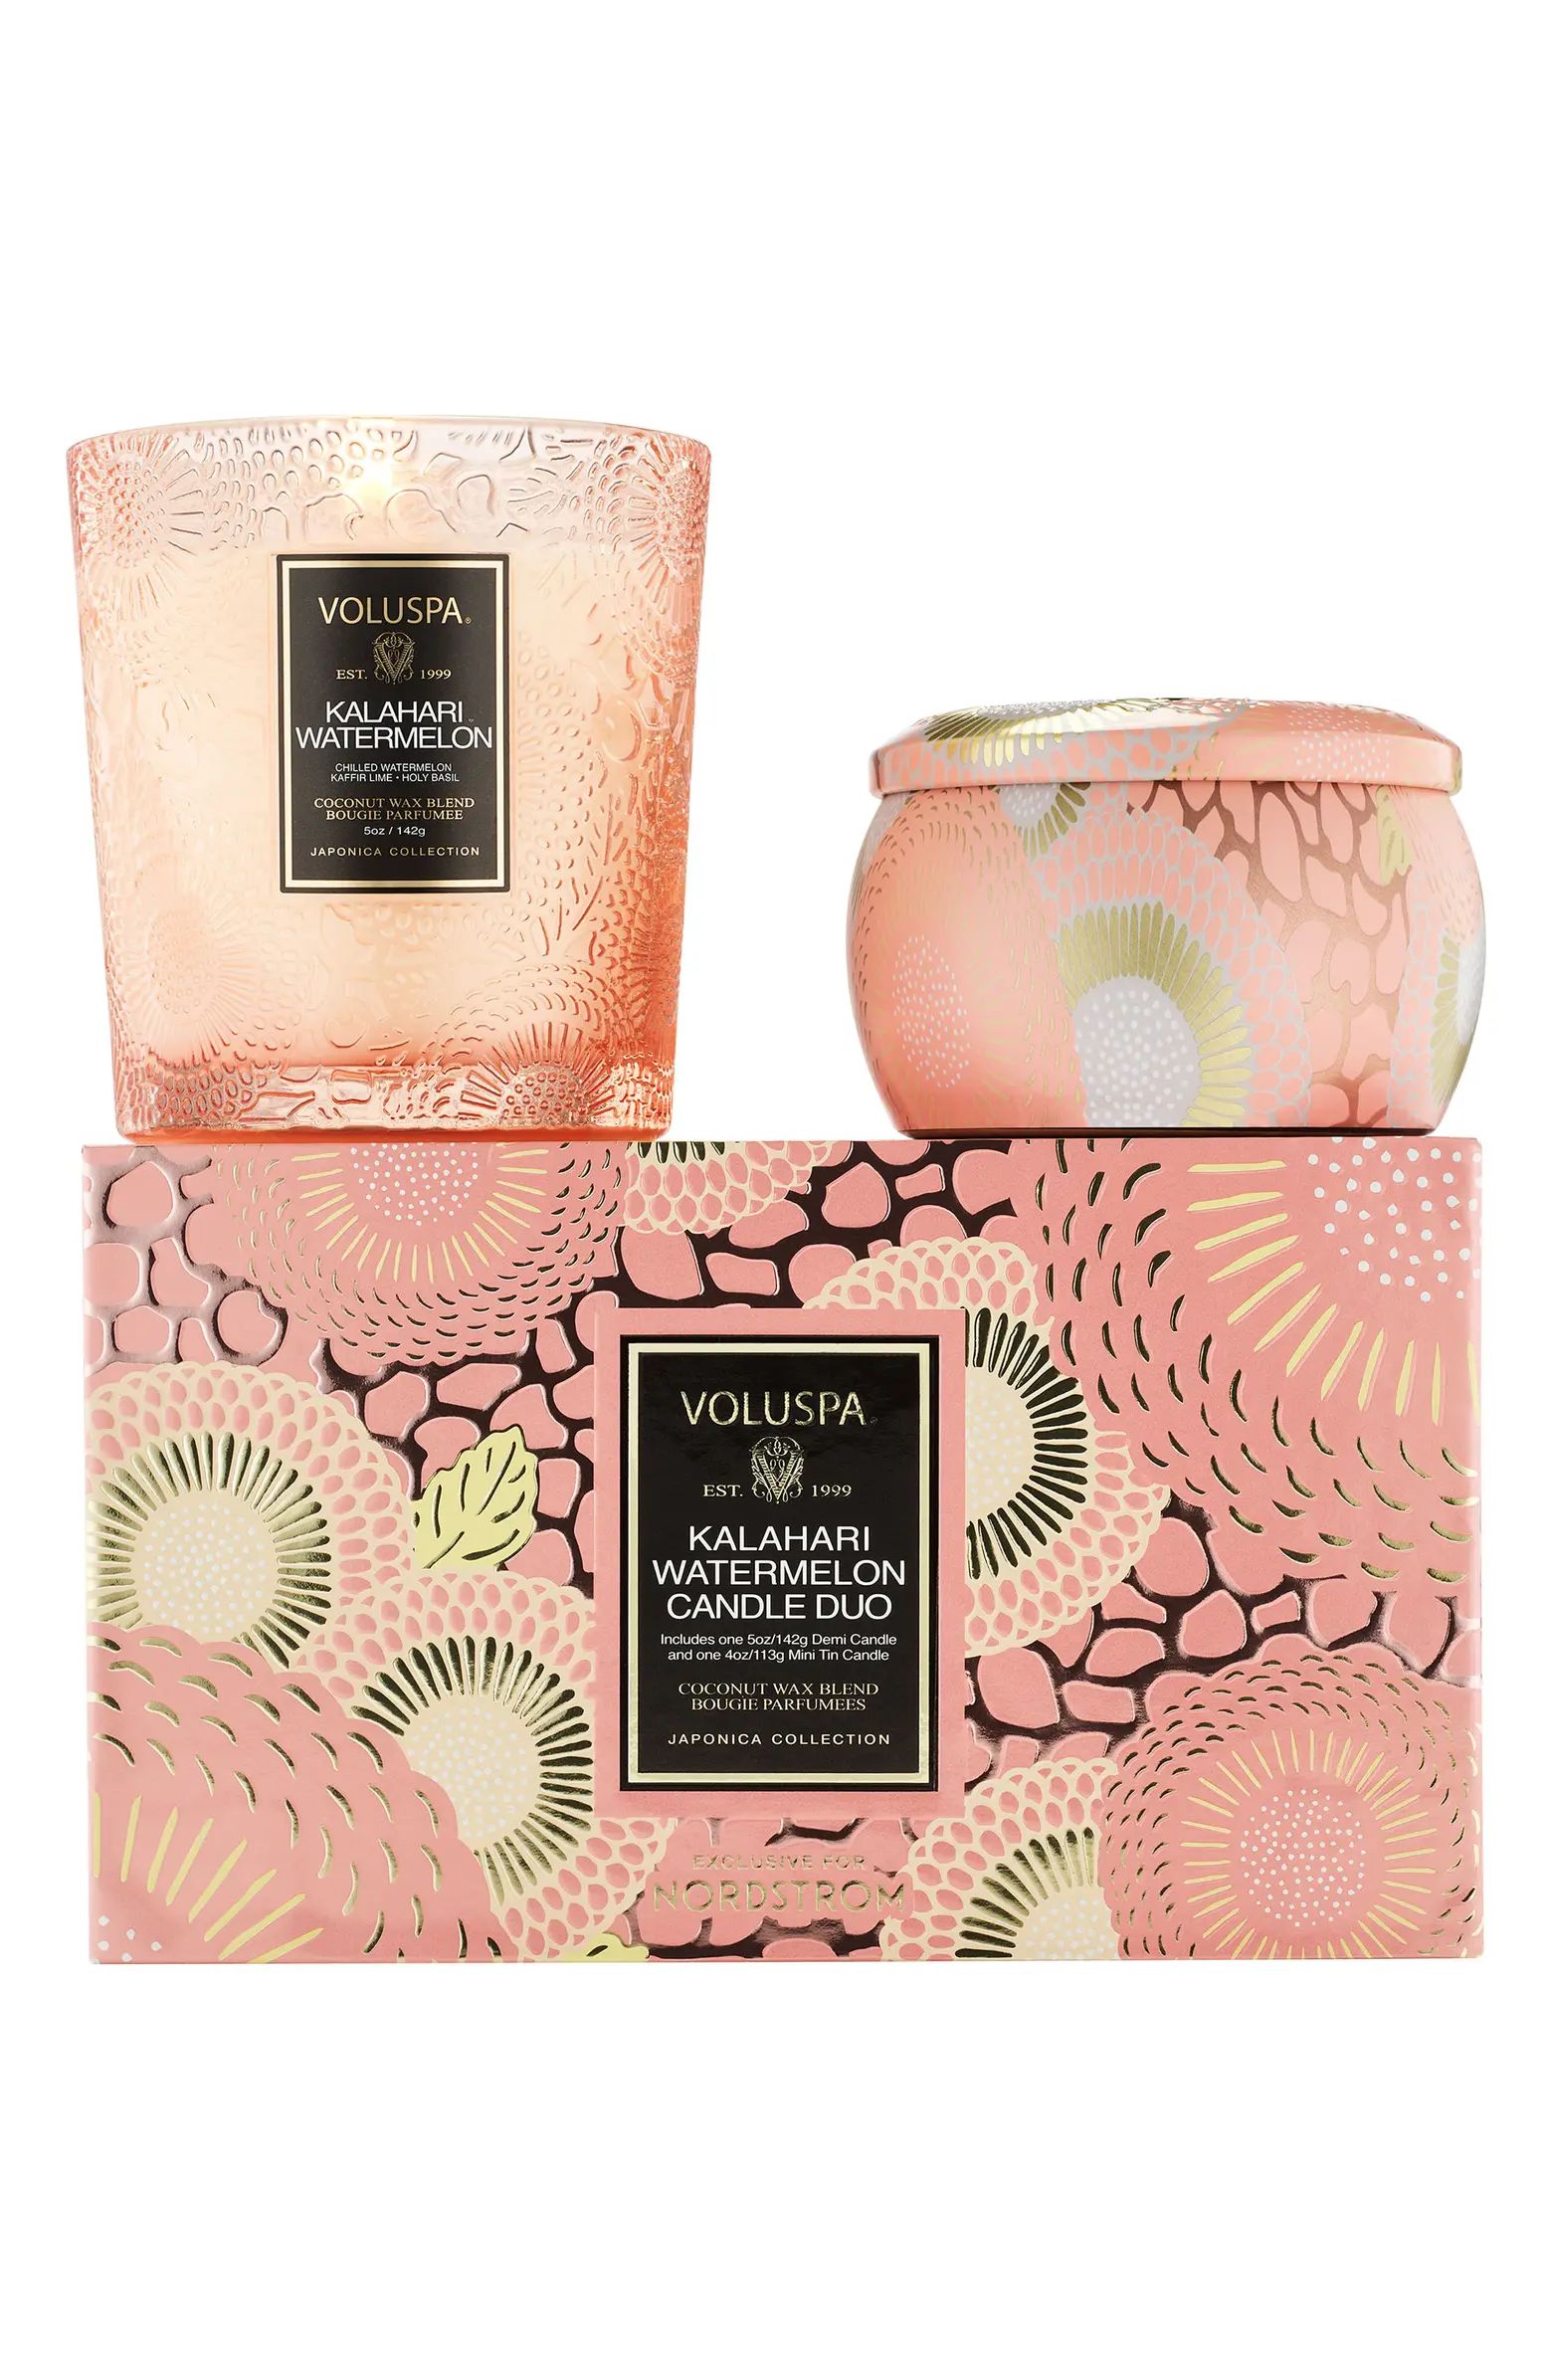 Kalahari Watermelon Candle Duo (Limited Edition) (Nordstrom Exclusive) $32 Value | Nordstrom